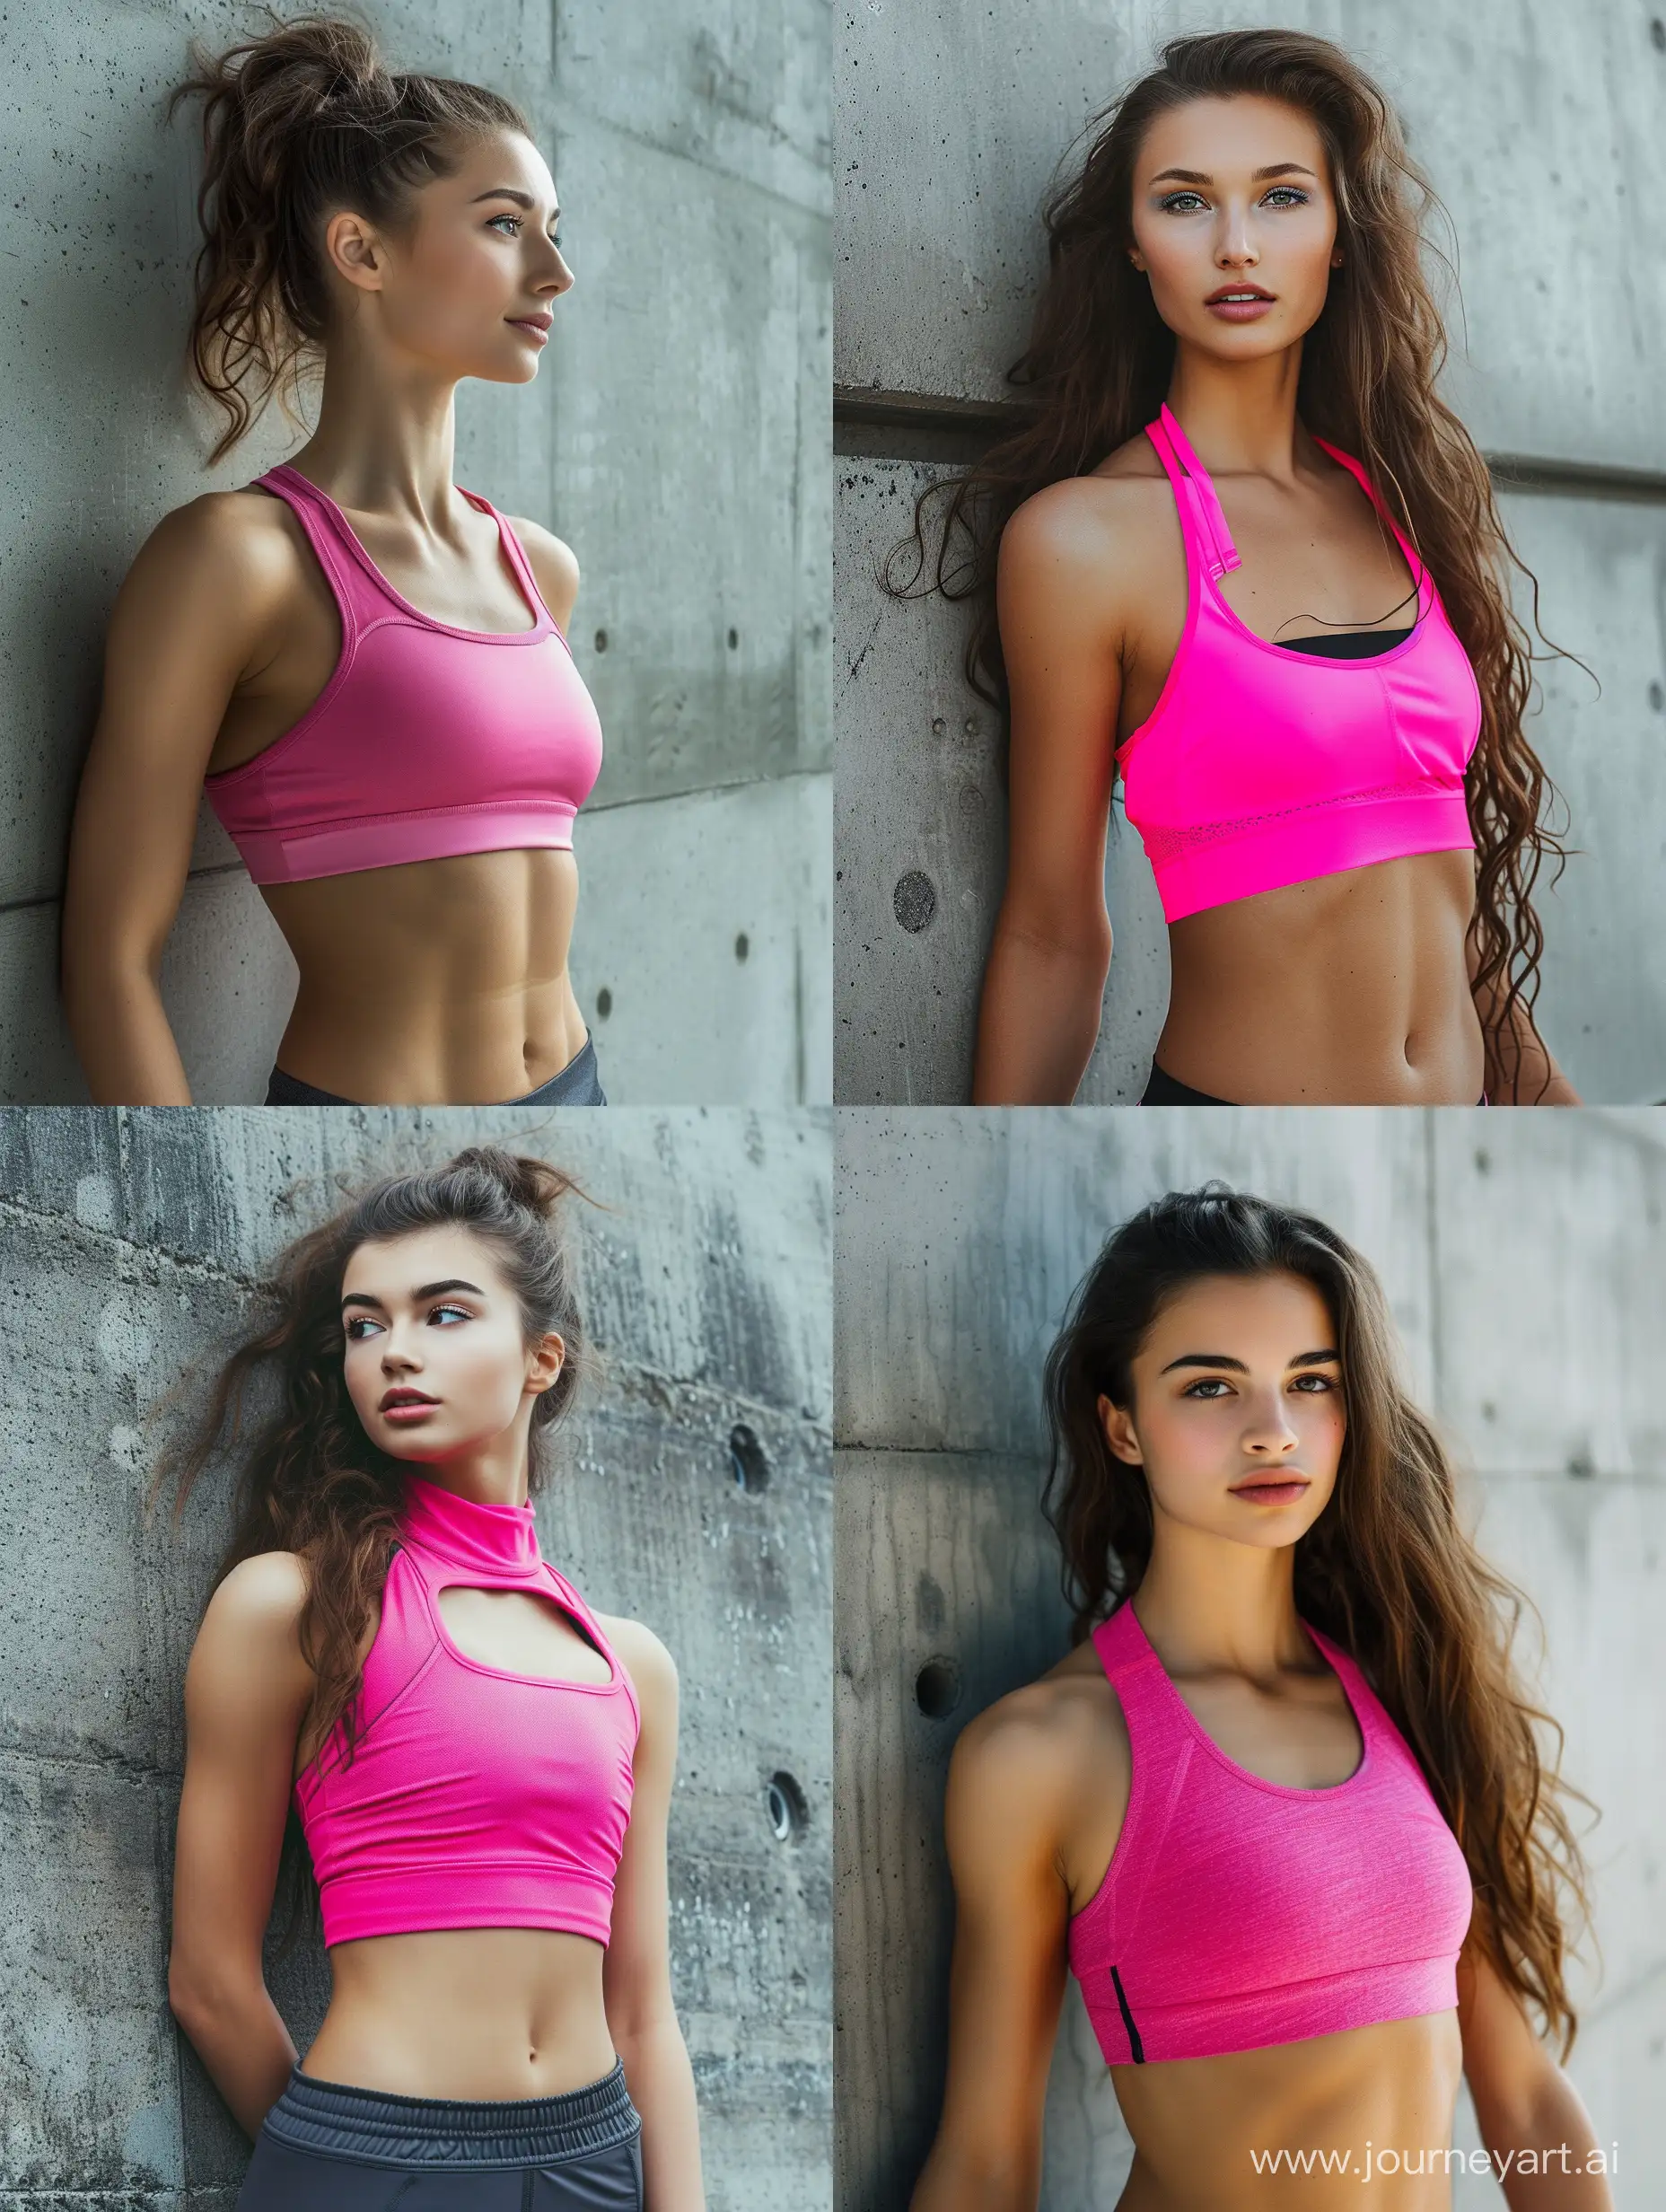 Fitness-Enthusiast-in-Stylish-Pink-Activewear-by-Concrete-Wall